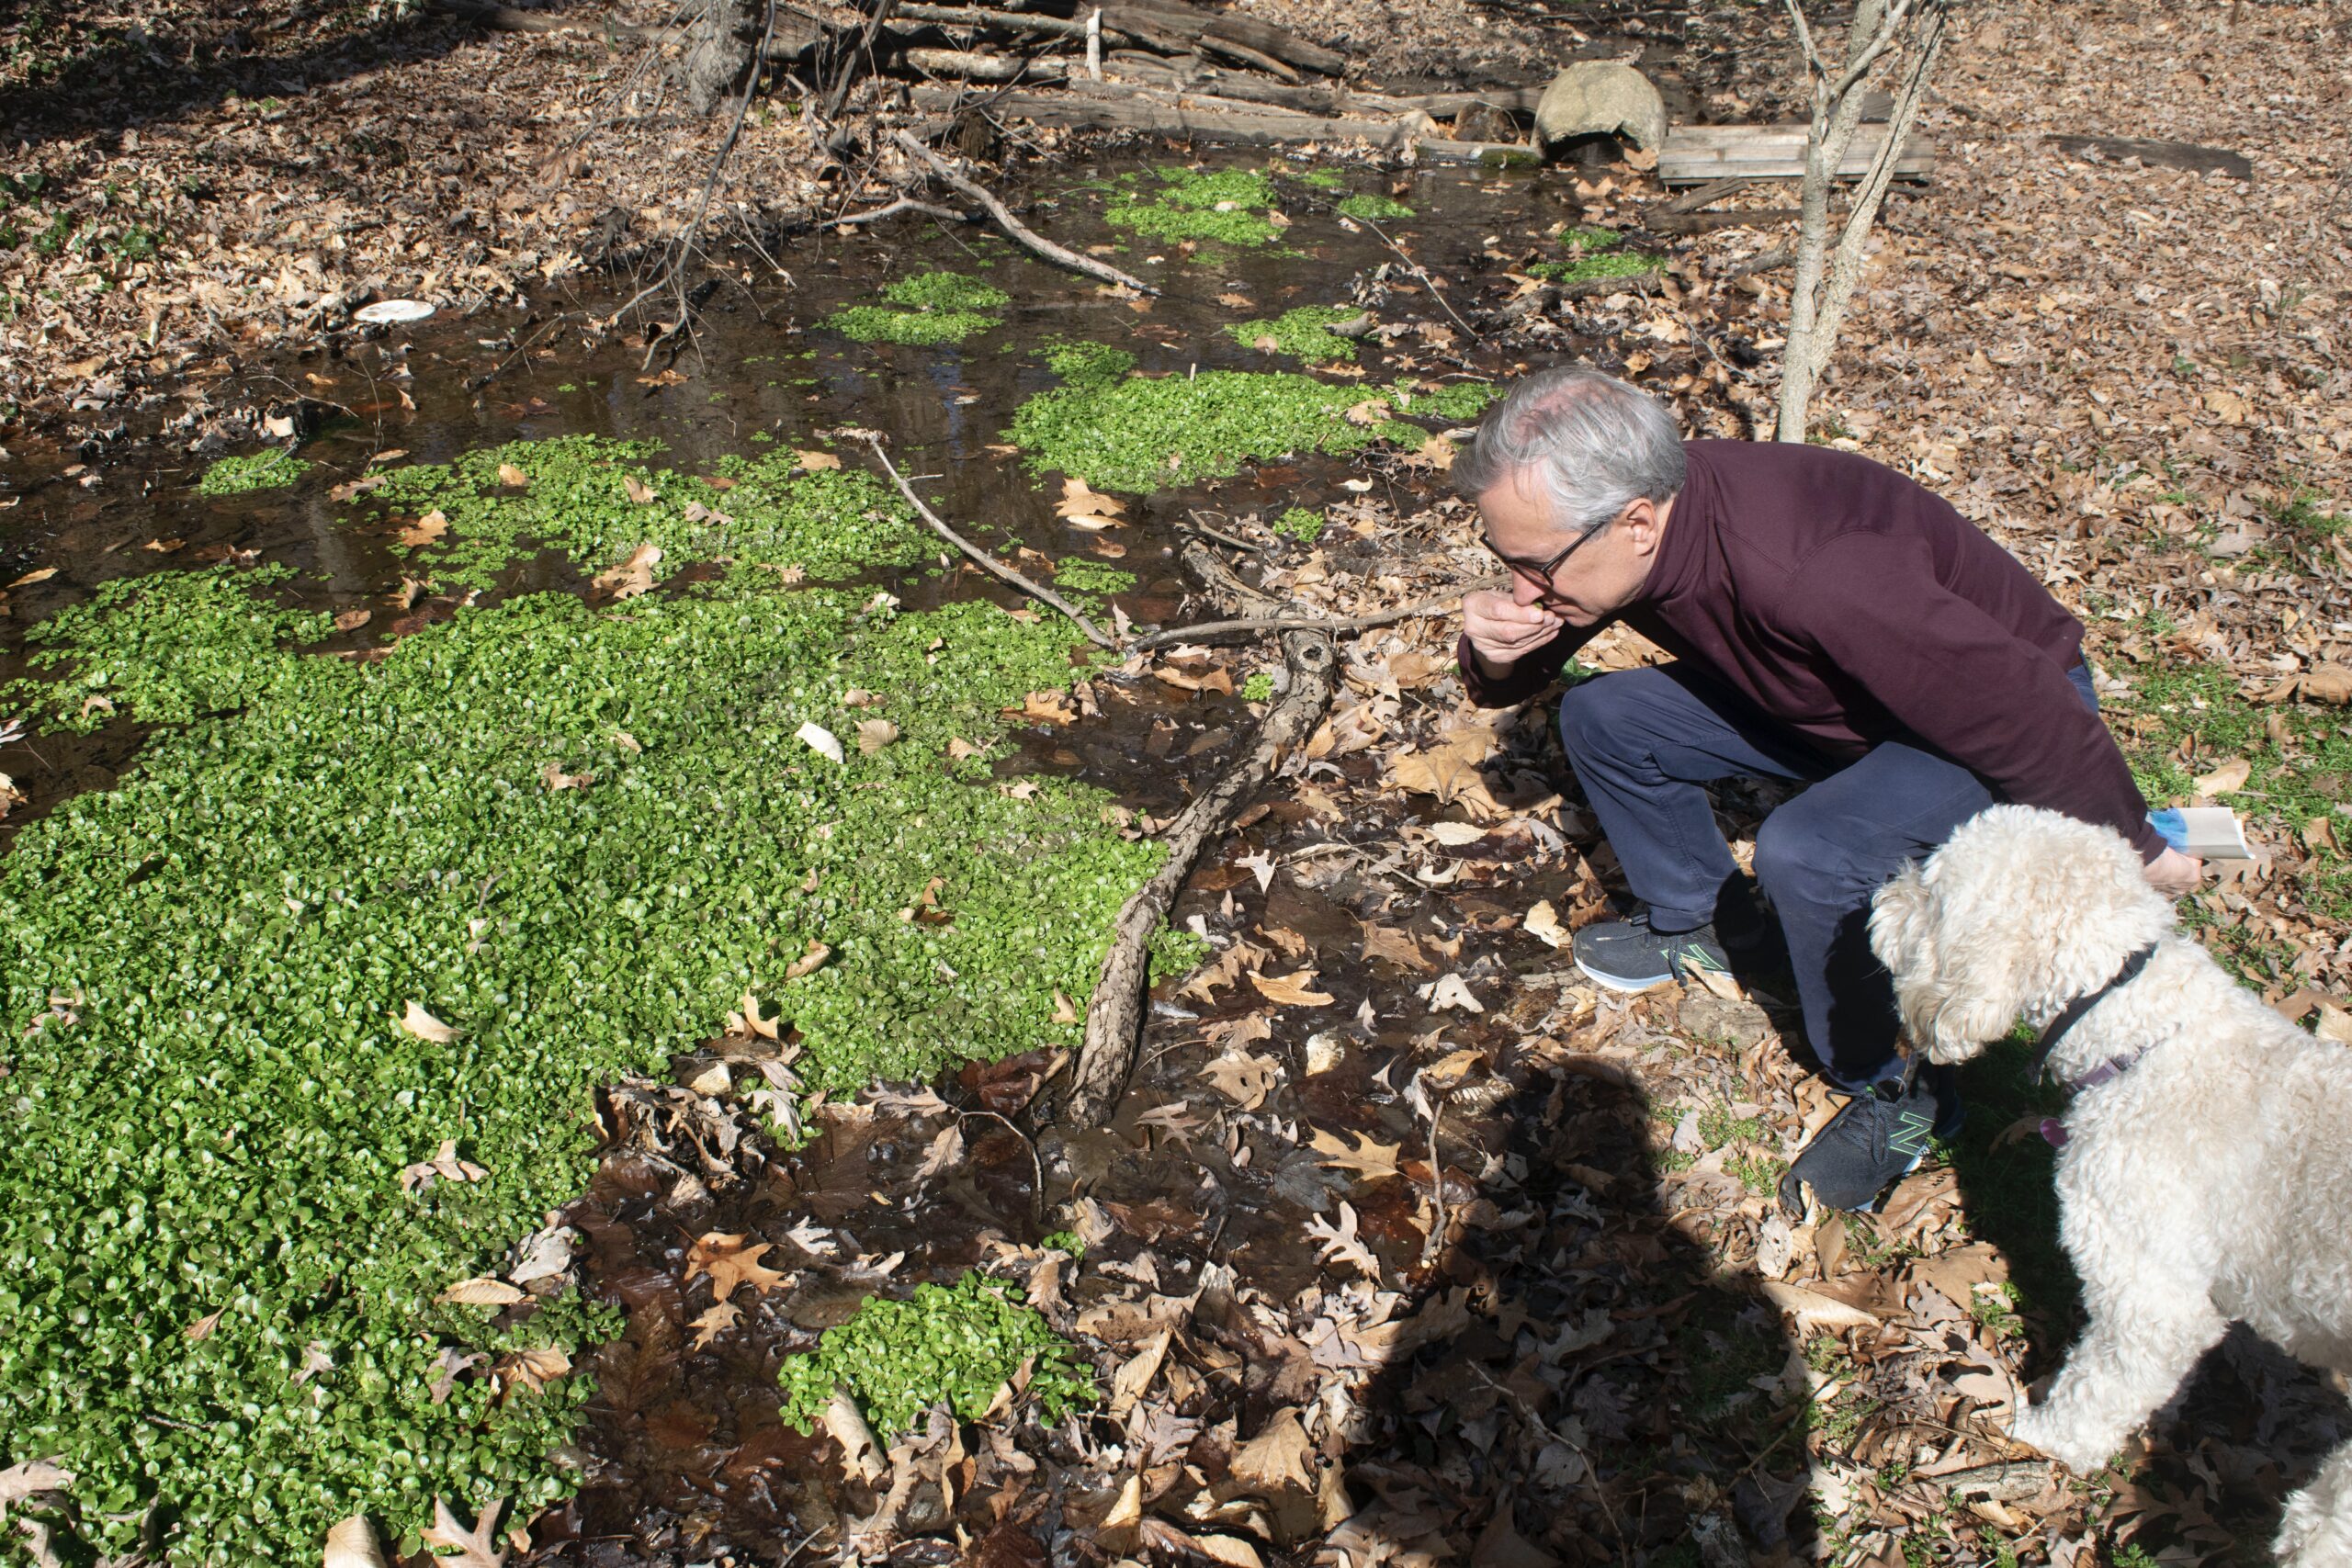 Dryden samples the watercress that grows in the Piney Branch area. Animals like ducks and deer also eat the slightly peppery vegetable.